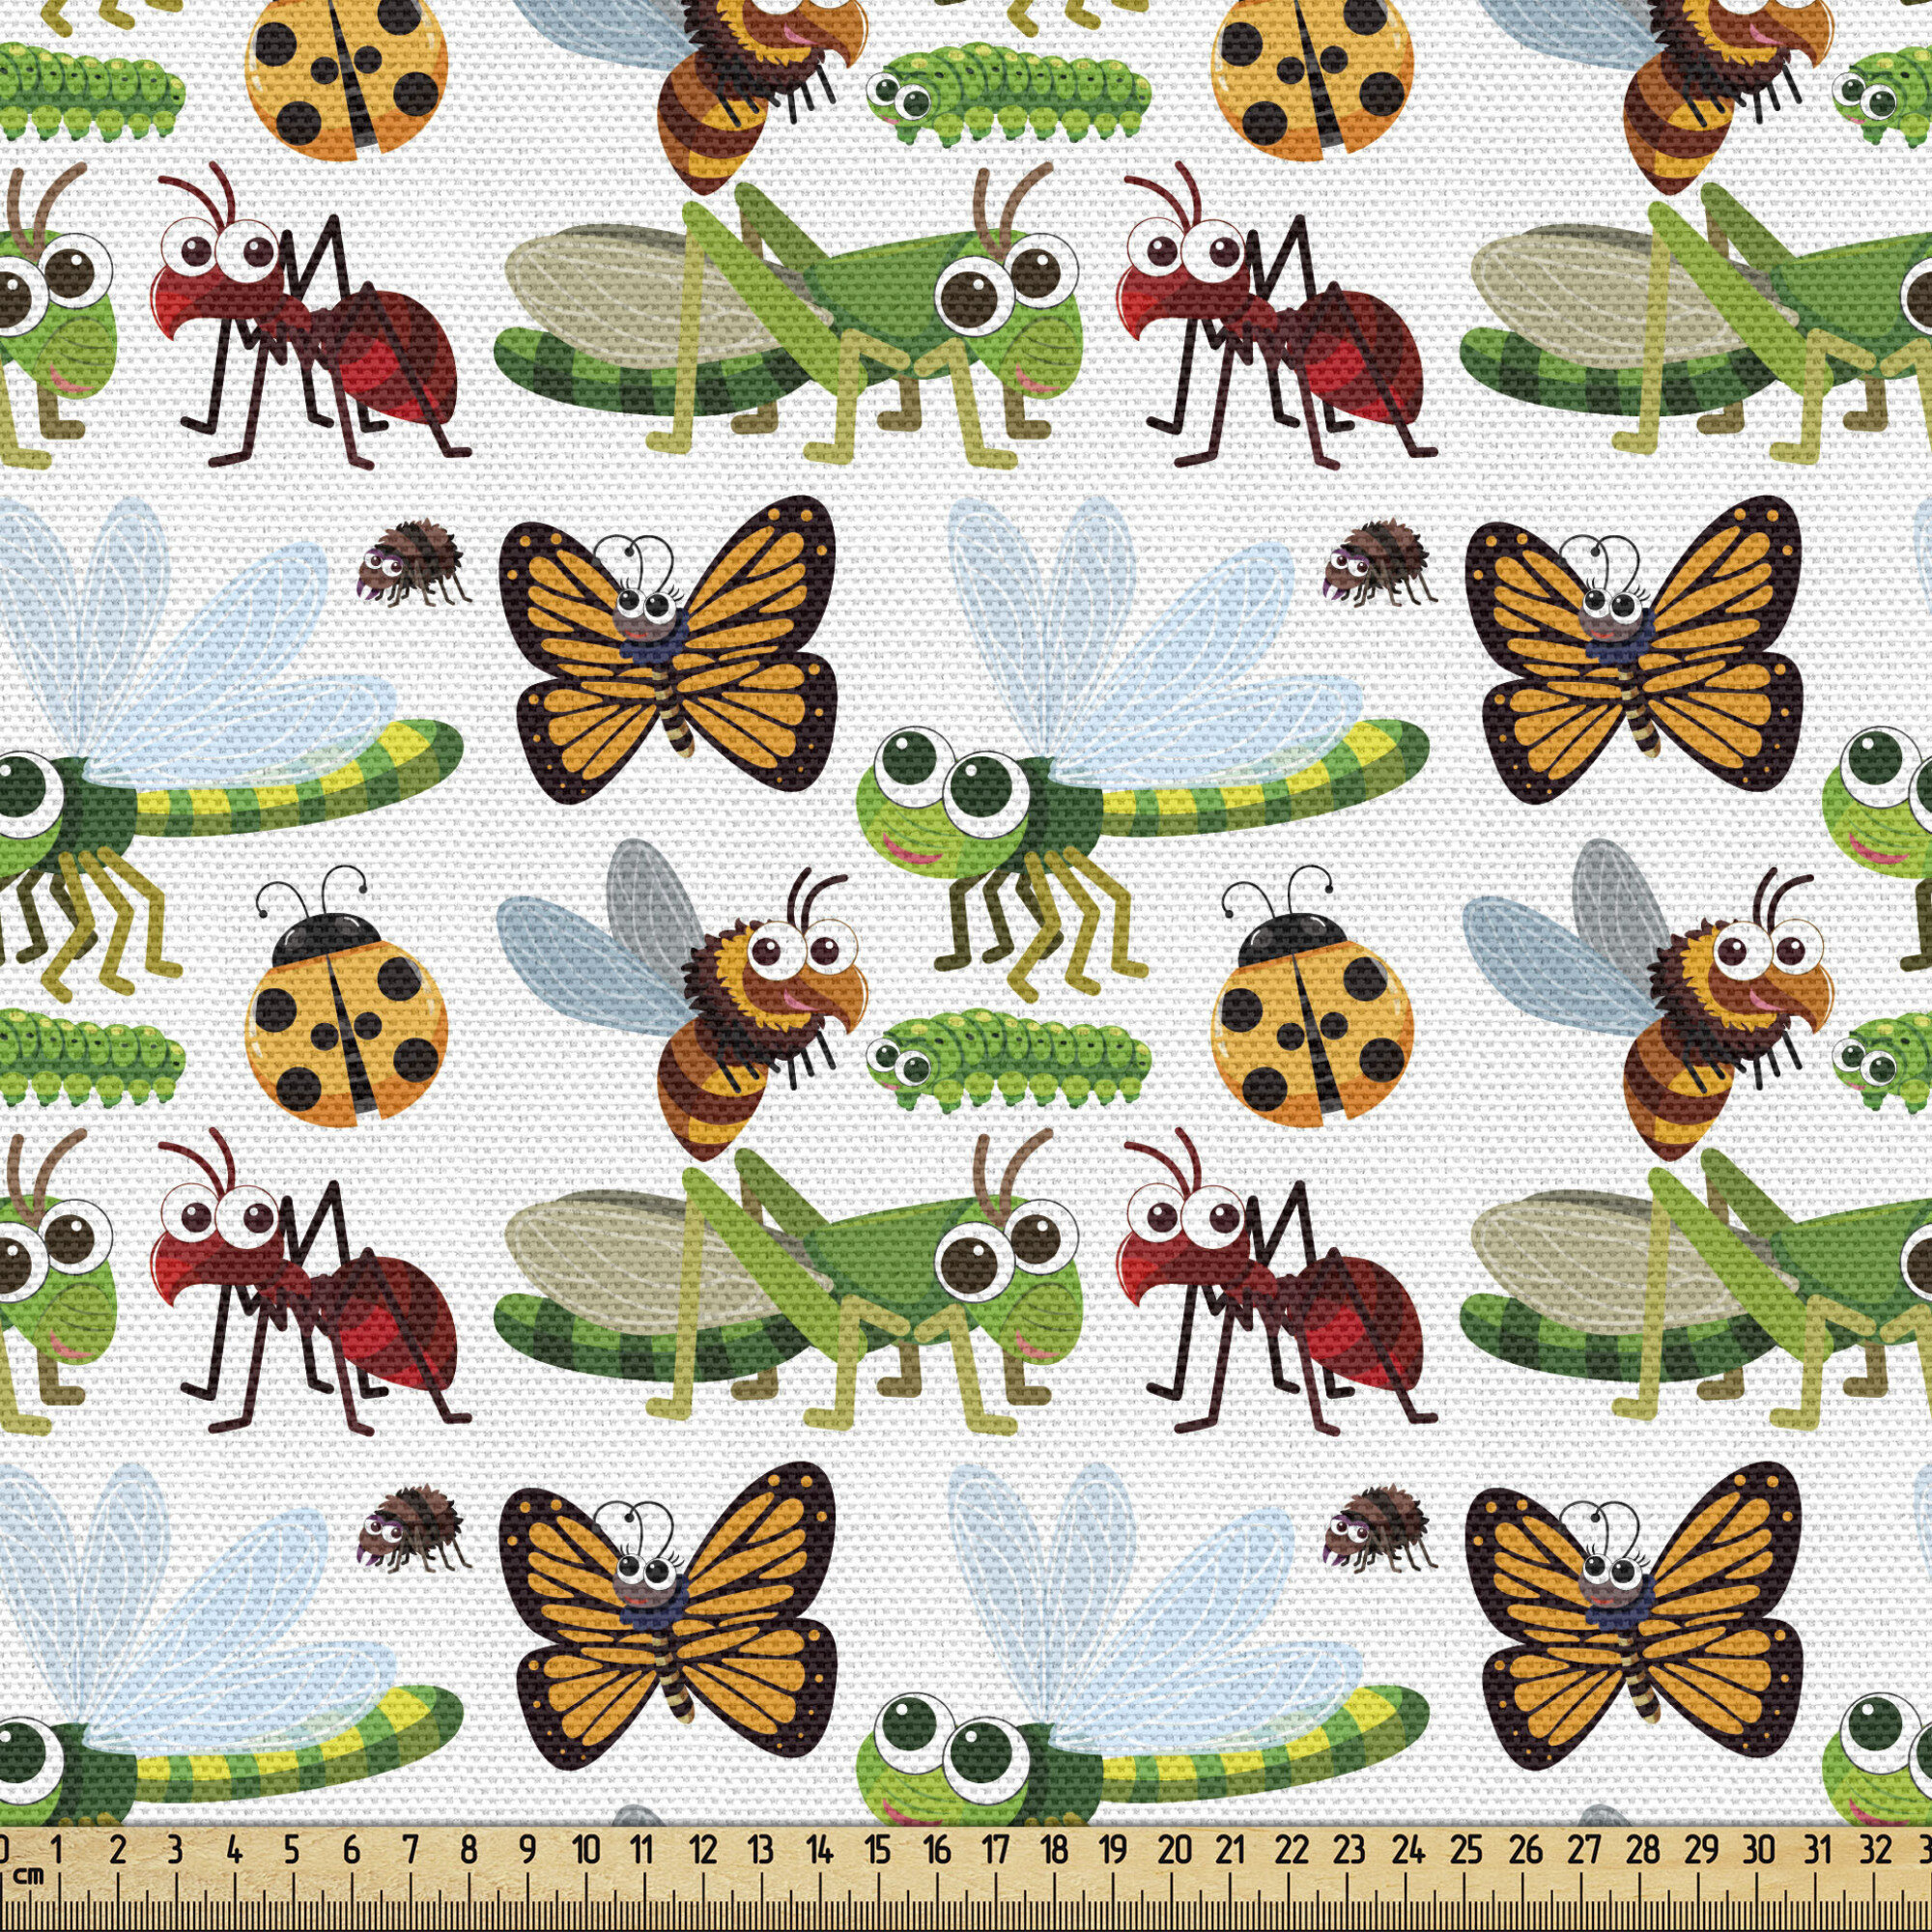 East Urban Home Cartoon Fabric By The Yard, Funny Insects Wasp Bee  Caterpillar Dragonfly Ladybug Ant Cheerful Characters, Decorative Fabric  For Upholstery And Home Accents,White Multicolor | Wayfair